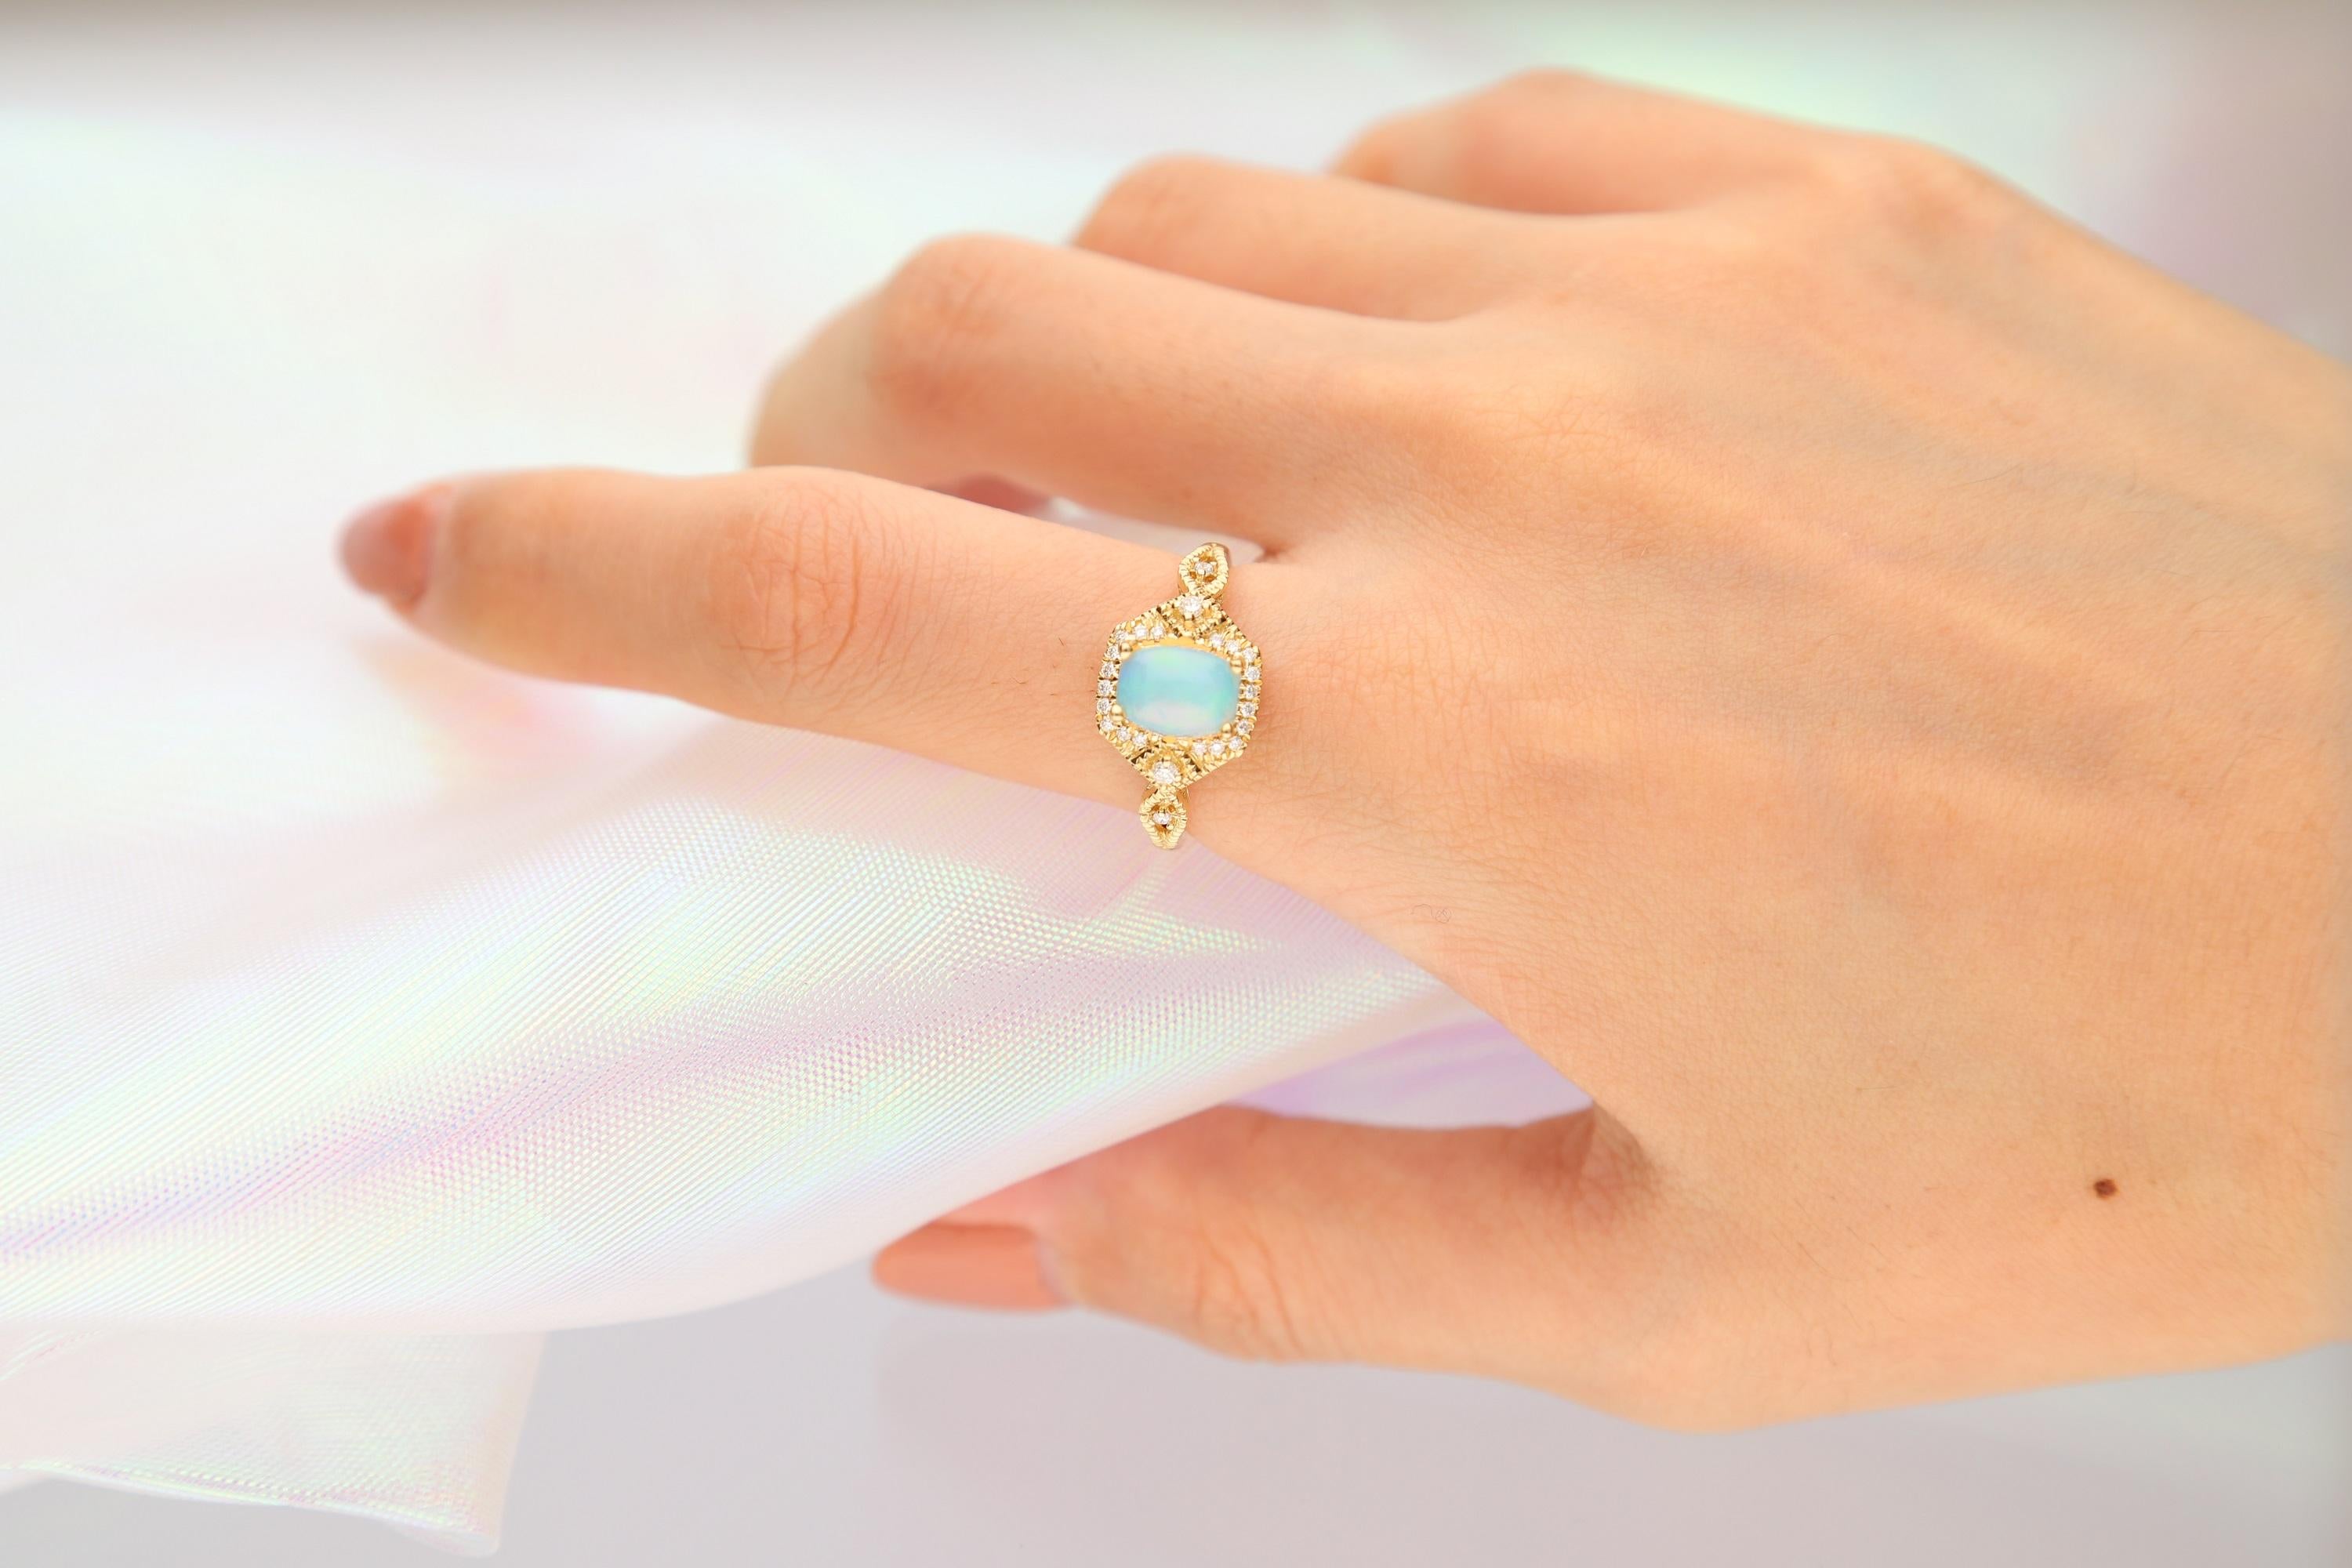 Stunning, timeless and classy eternity Unique Ring. Decorate yourself in luxury with this Gin & Grace Ring. The 14K Yellow Gold jewelry boasts Cushion-Cut Prong Setting Natural Opal (1 pc) 0.97 Carat, along with Natural Round cut white Diamond (24